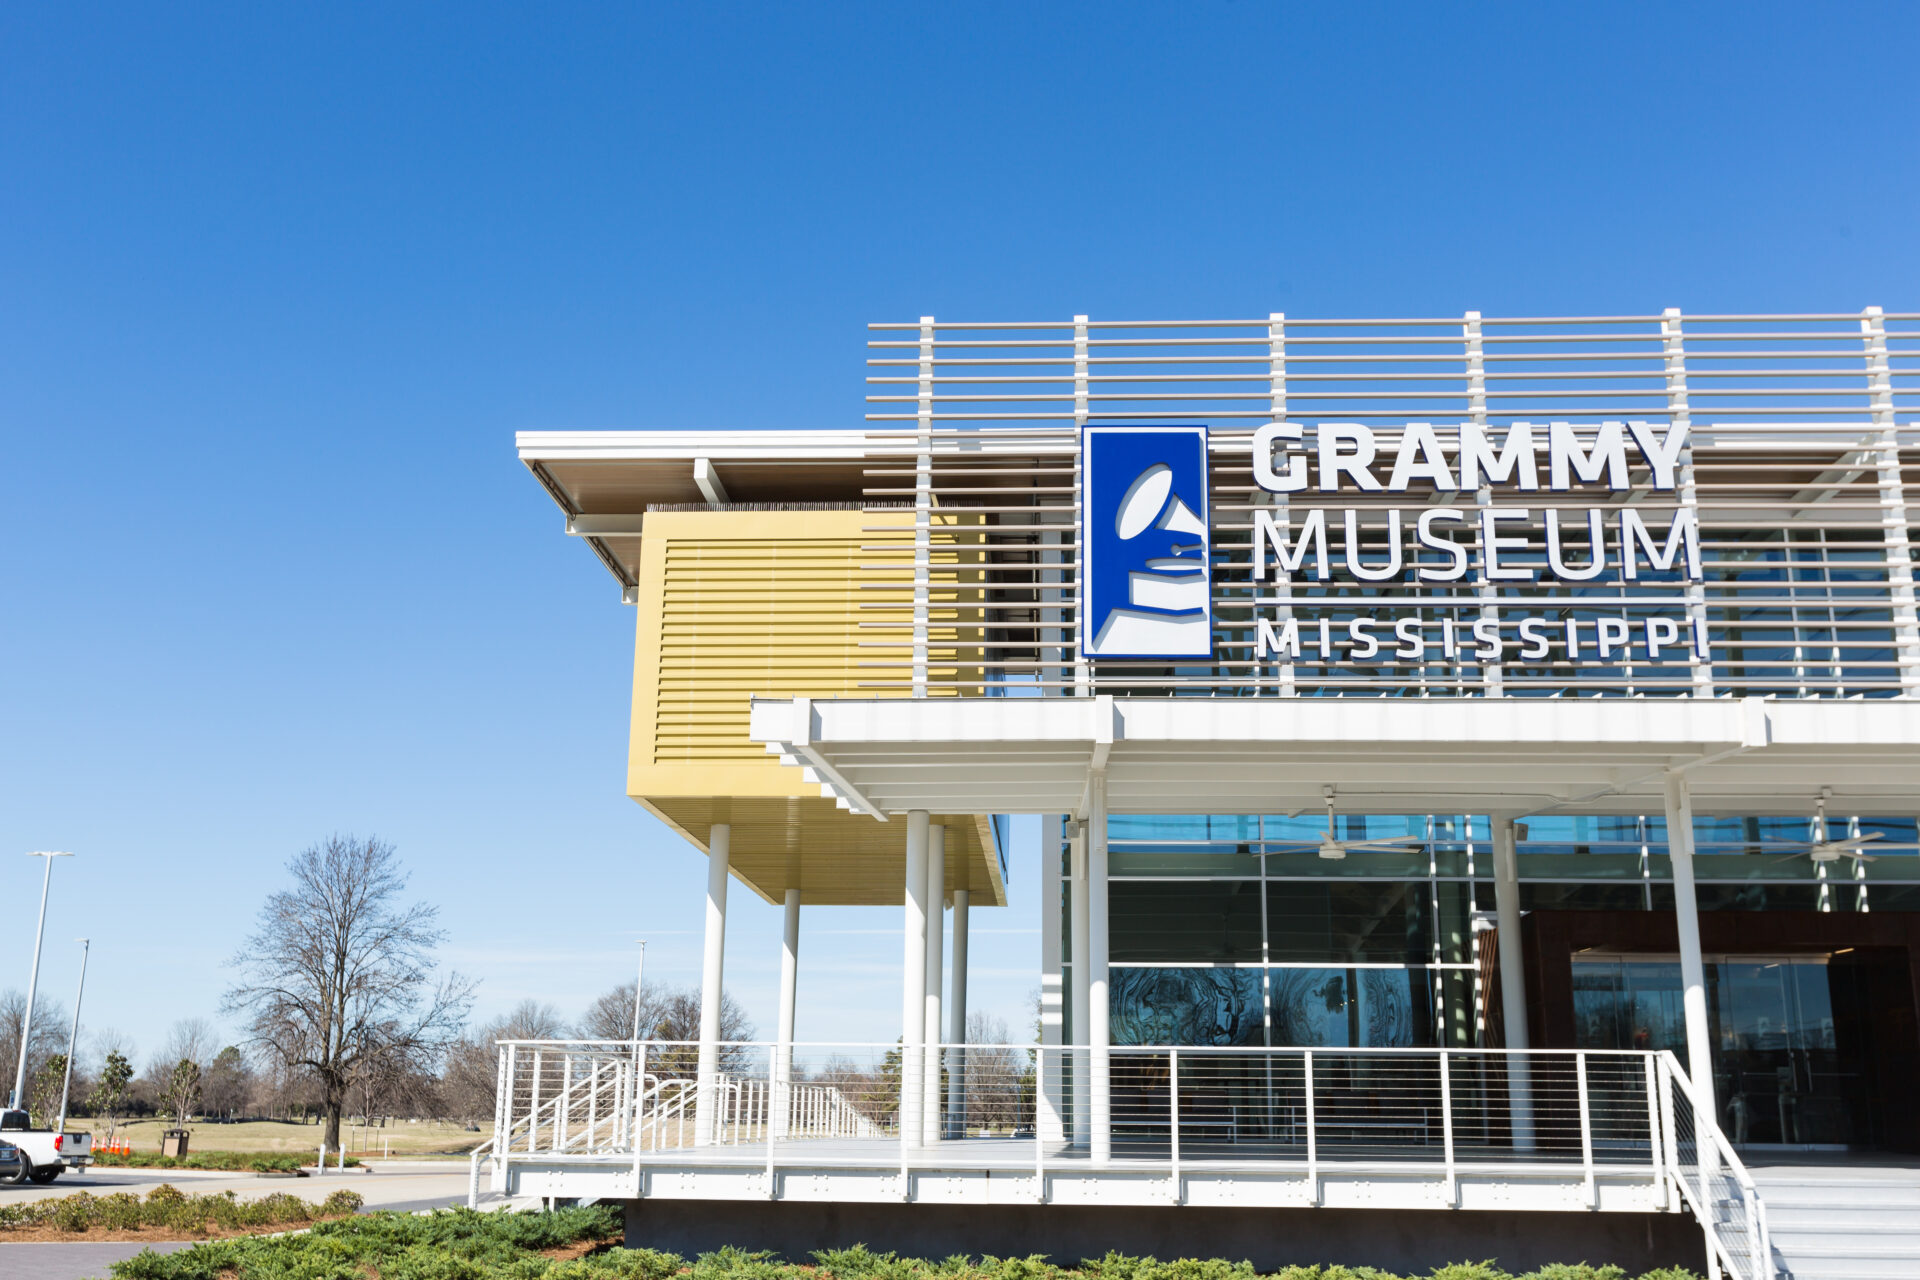 Grammy Museum in Cleveland, Mississippi.